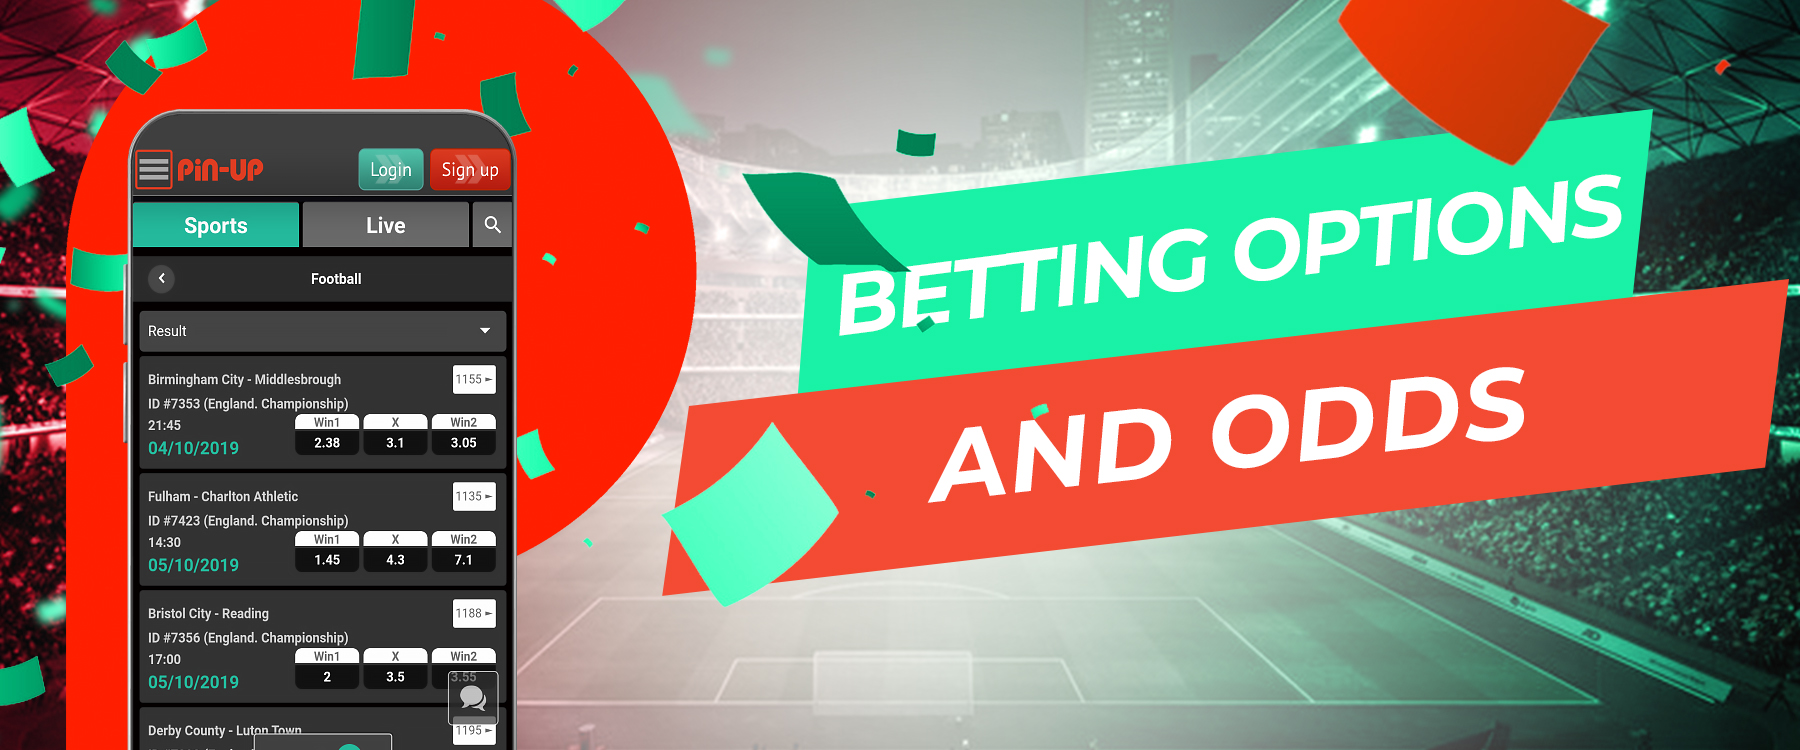 What Betting Options and Odds offers Pin Up to its Indian users